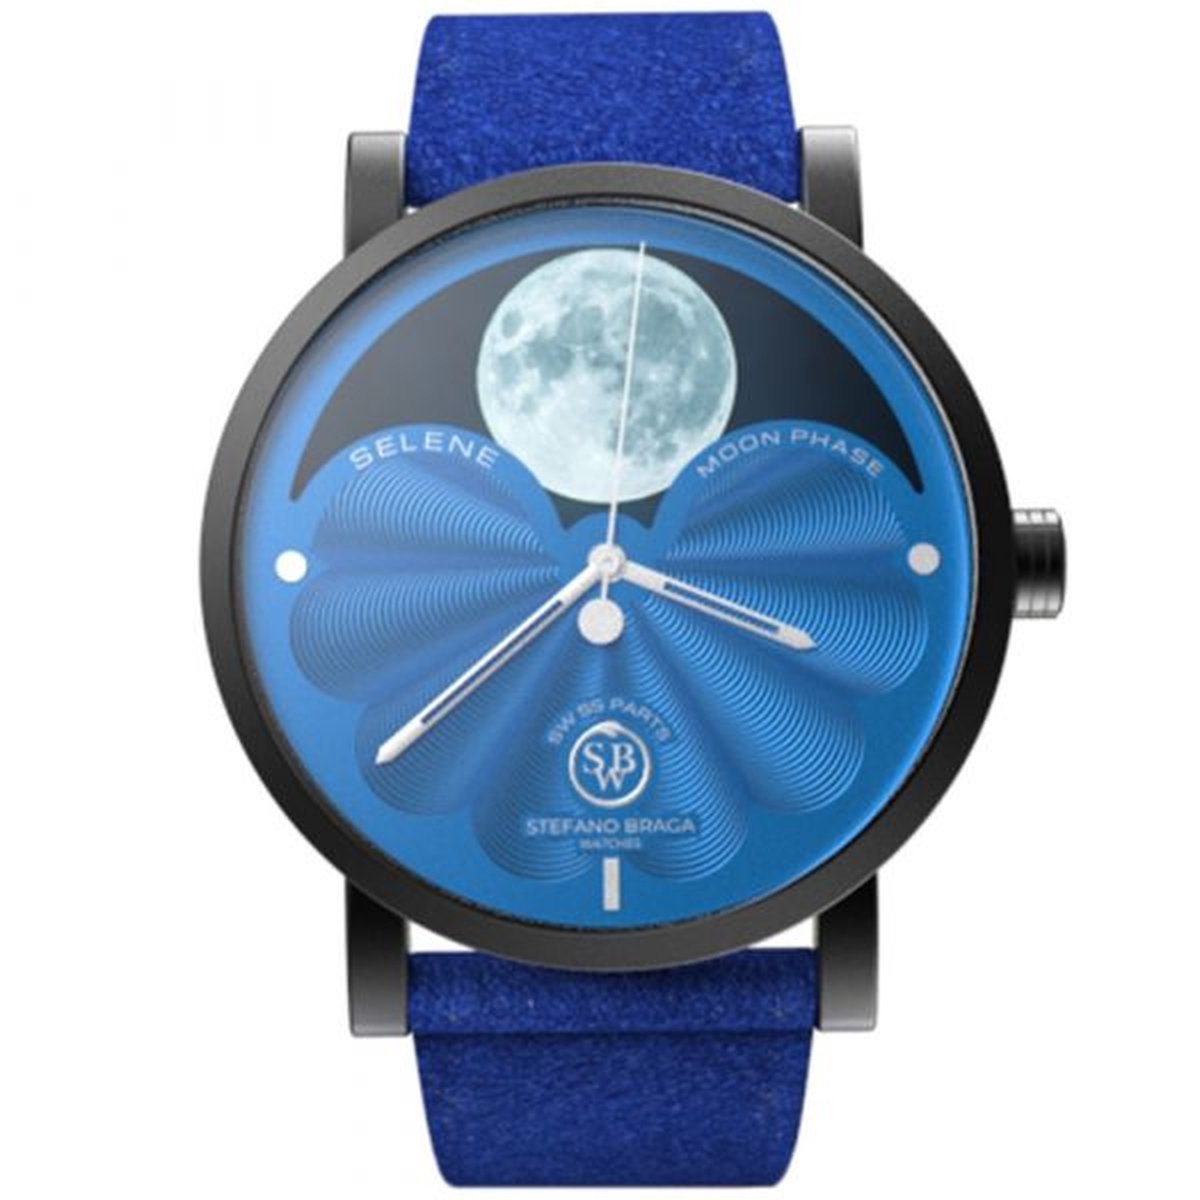 Stefano Braga Watches Swiss made hypoallergenic watch Selene DLC with Moon phase